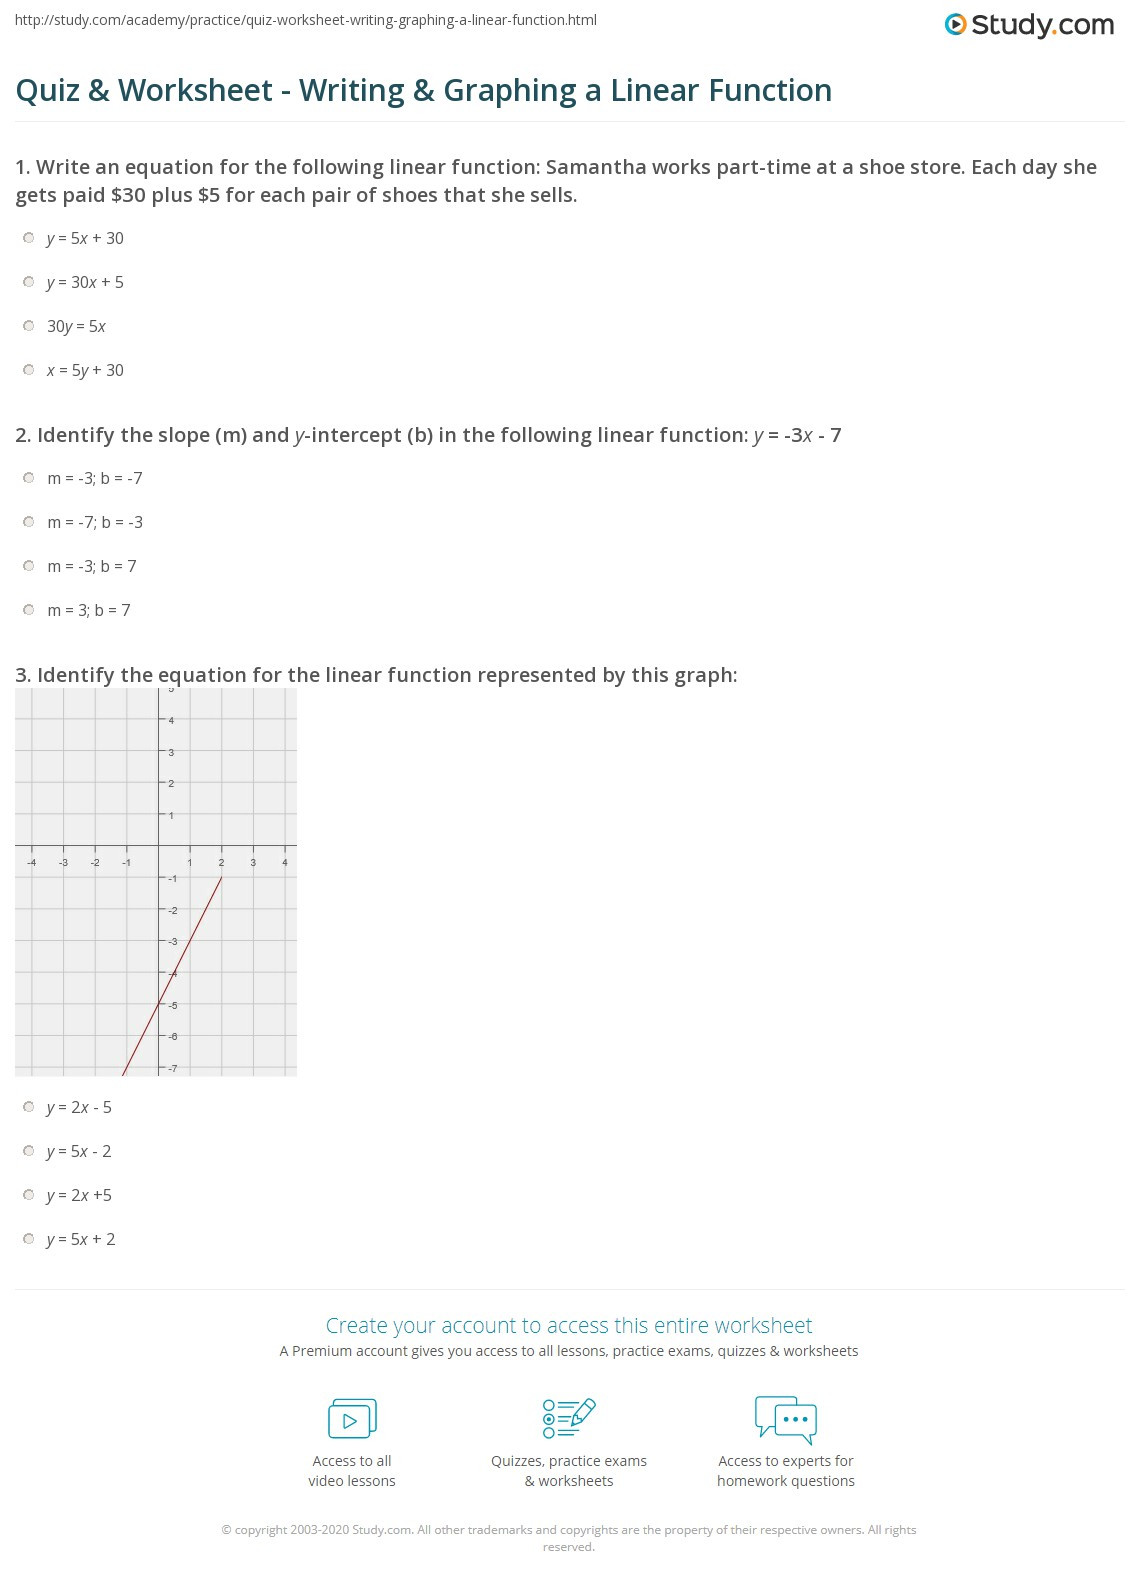 Graphing Linear Equations Practice Worksheet Quiz &amp; Worksheet Writing &amp; Graphing A Linear Function